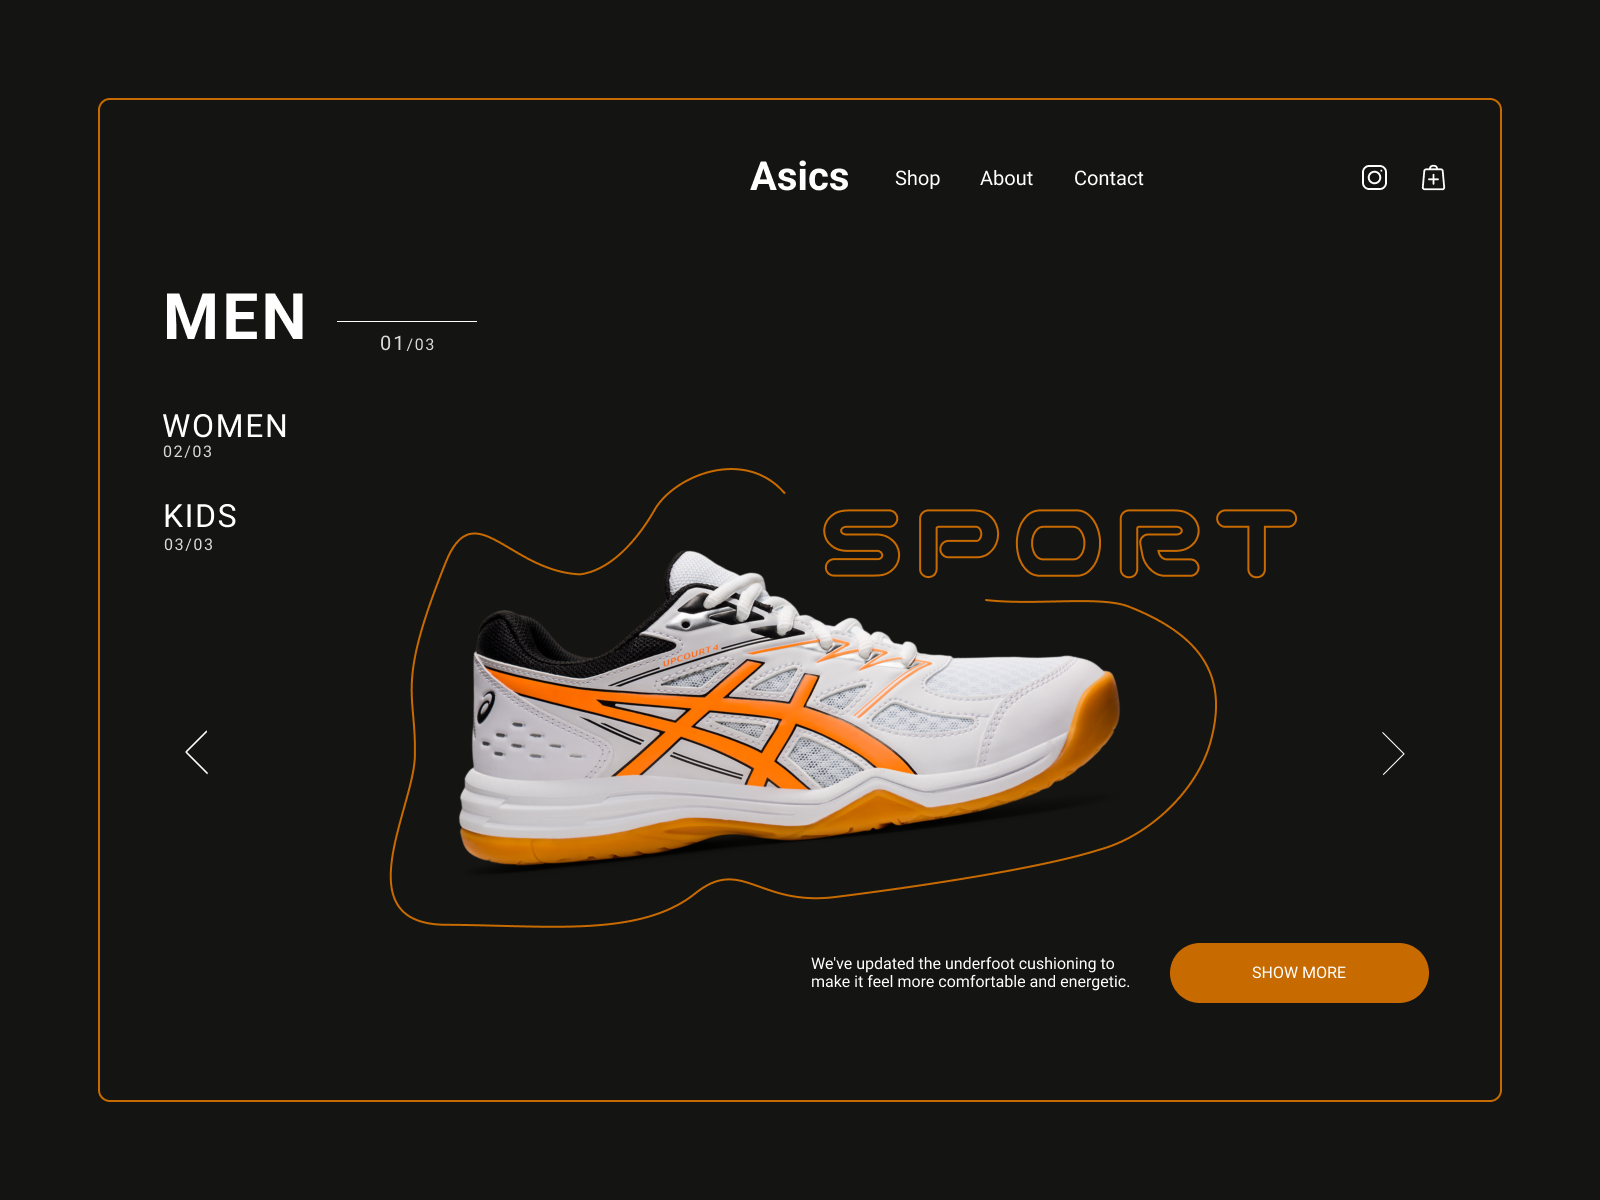 Redesign of the Asics online store by Karina on